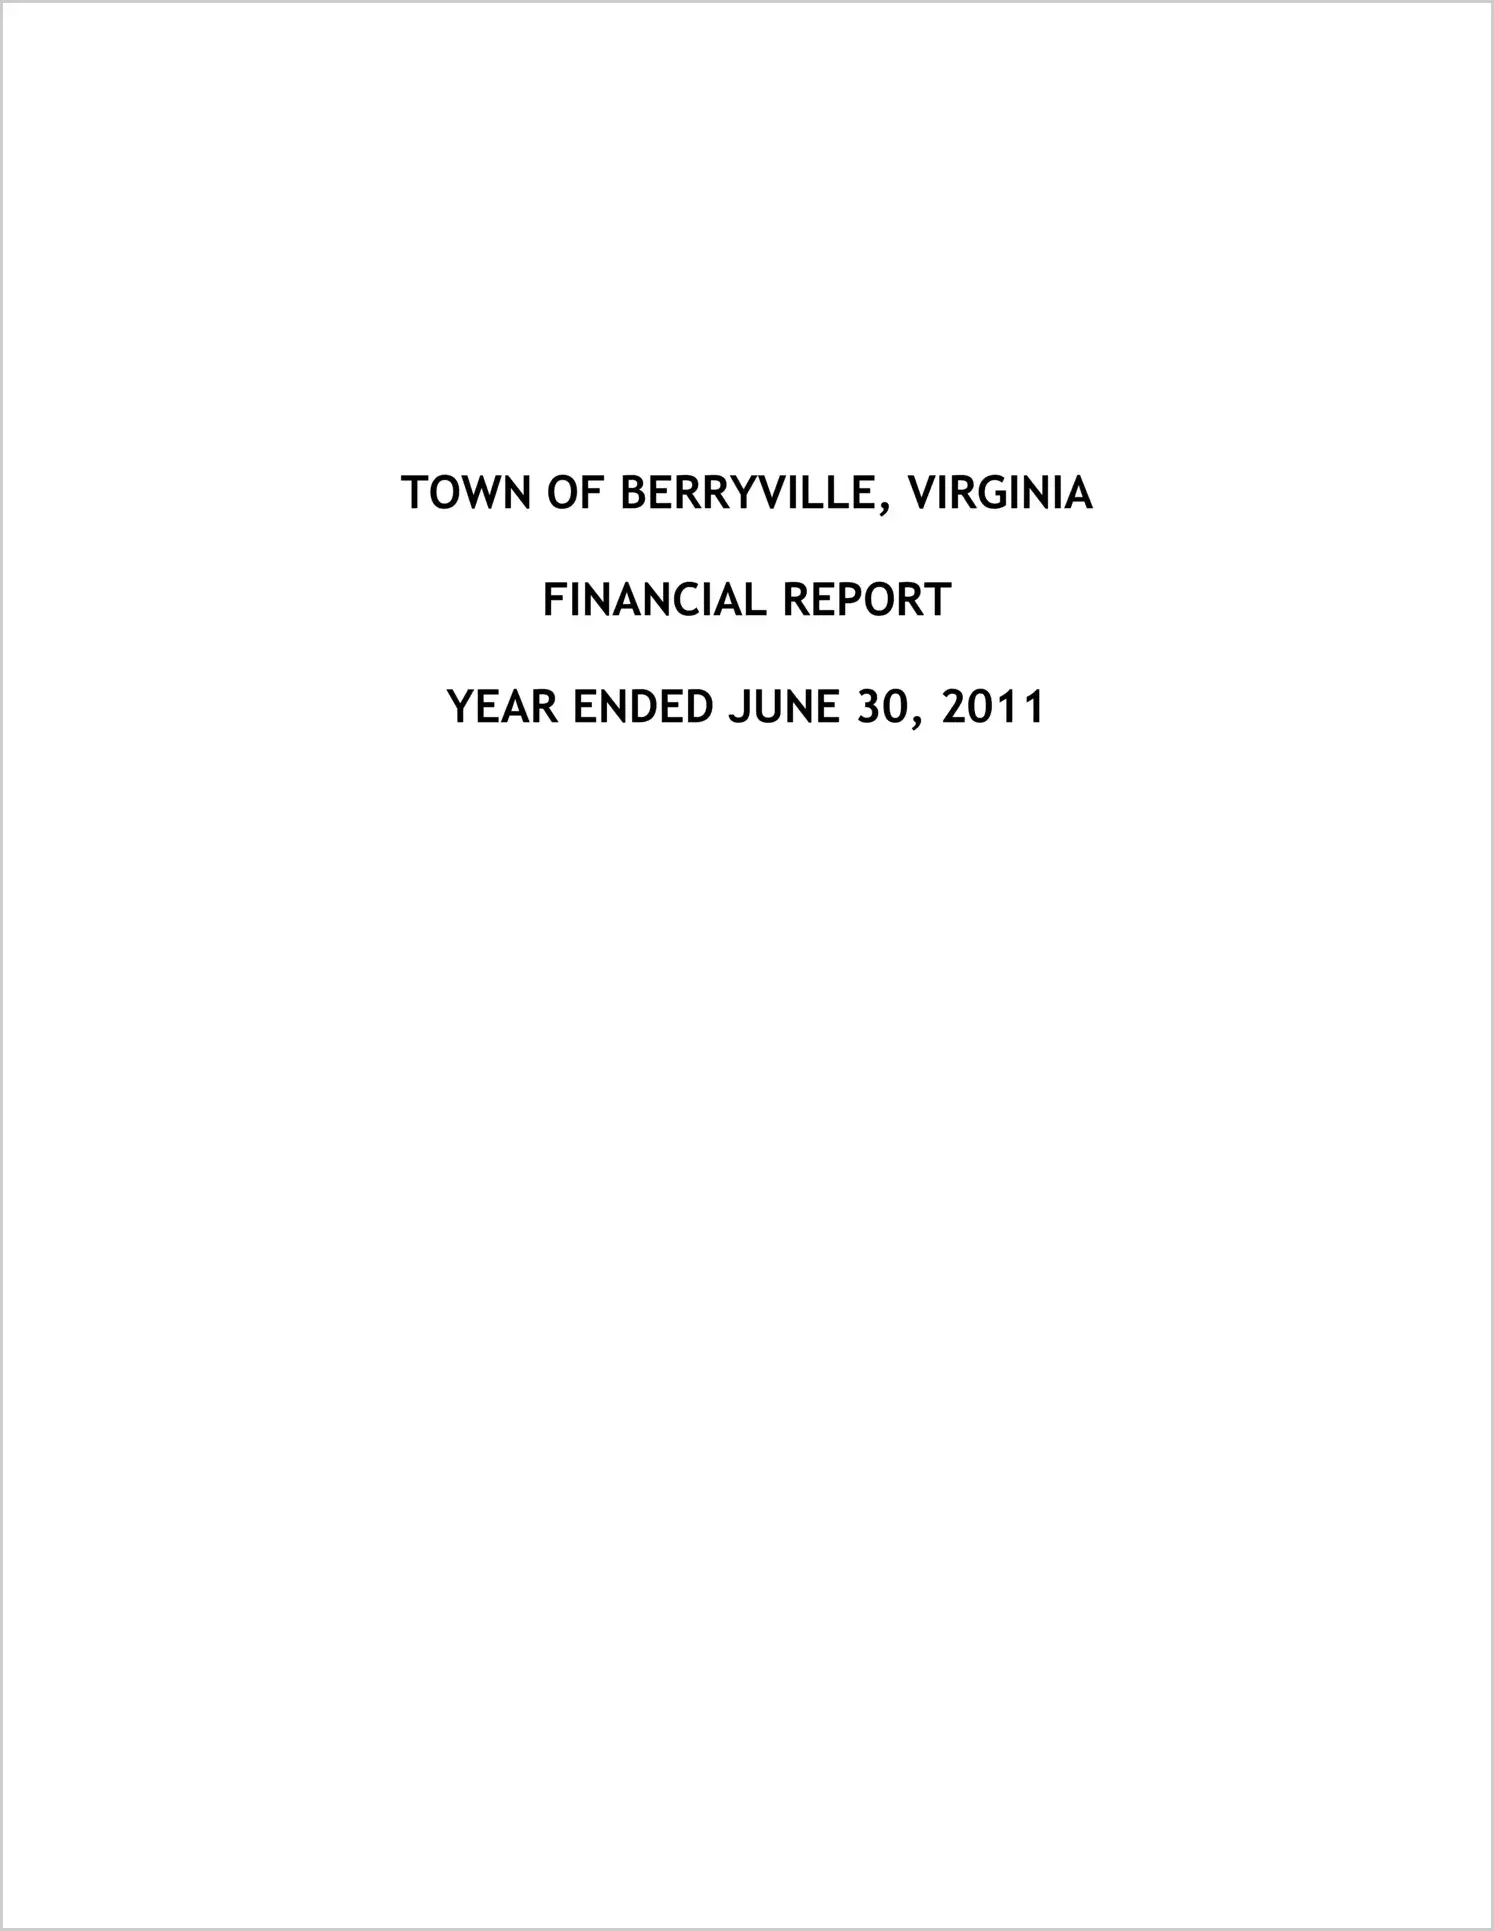 2011 Annual Financial Report for Town of Berryville